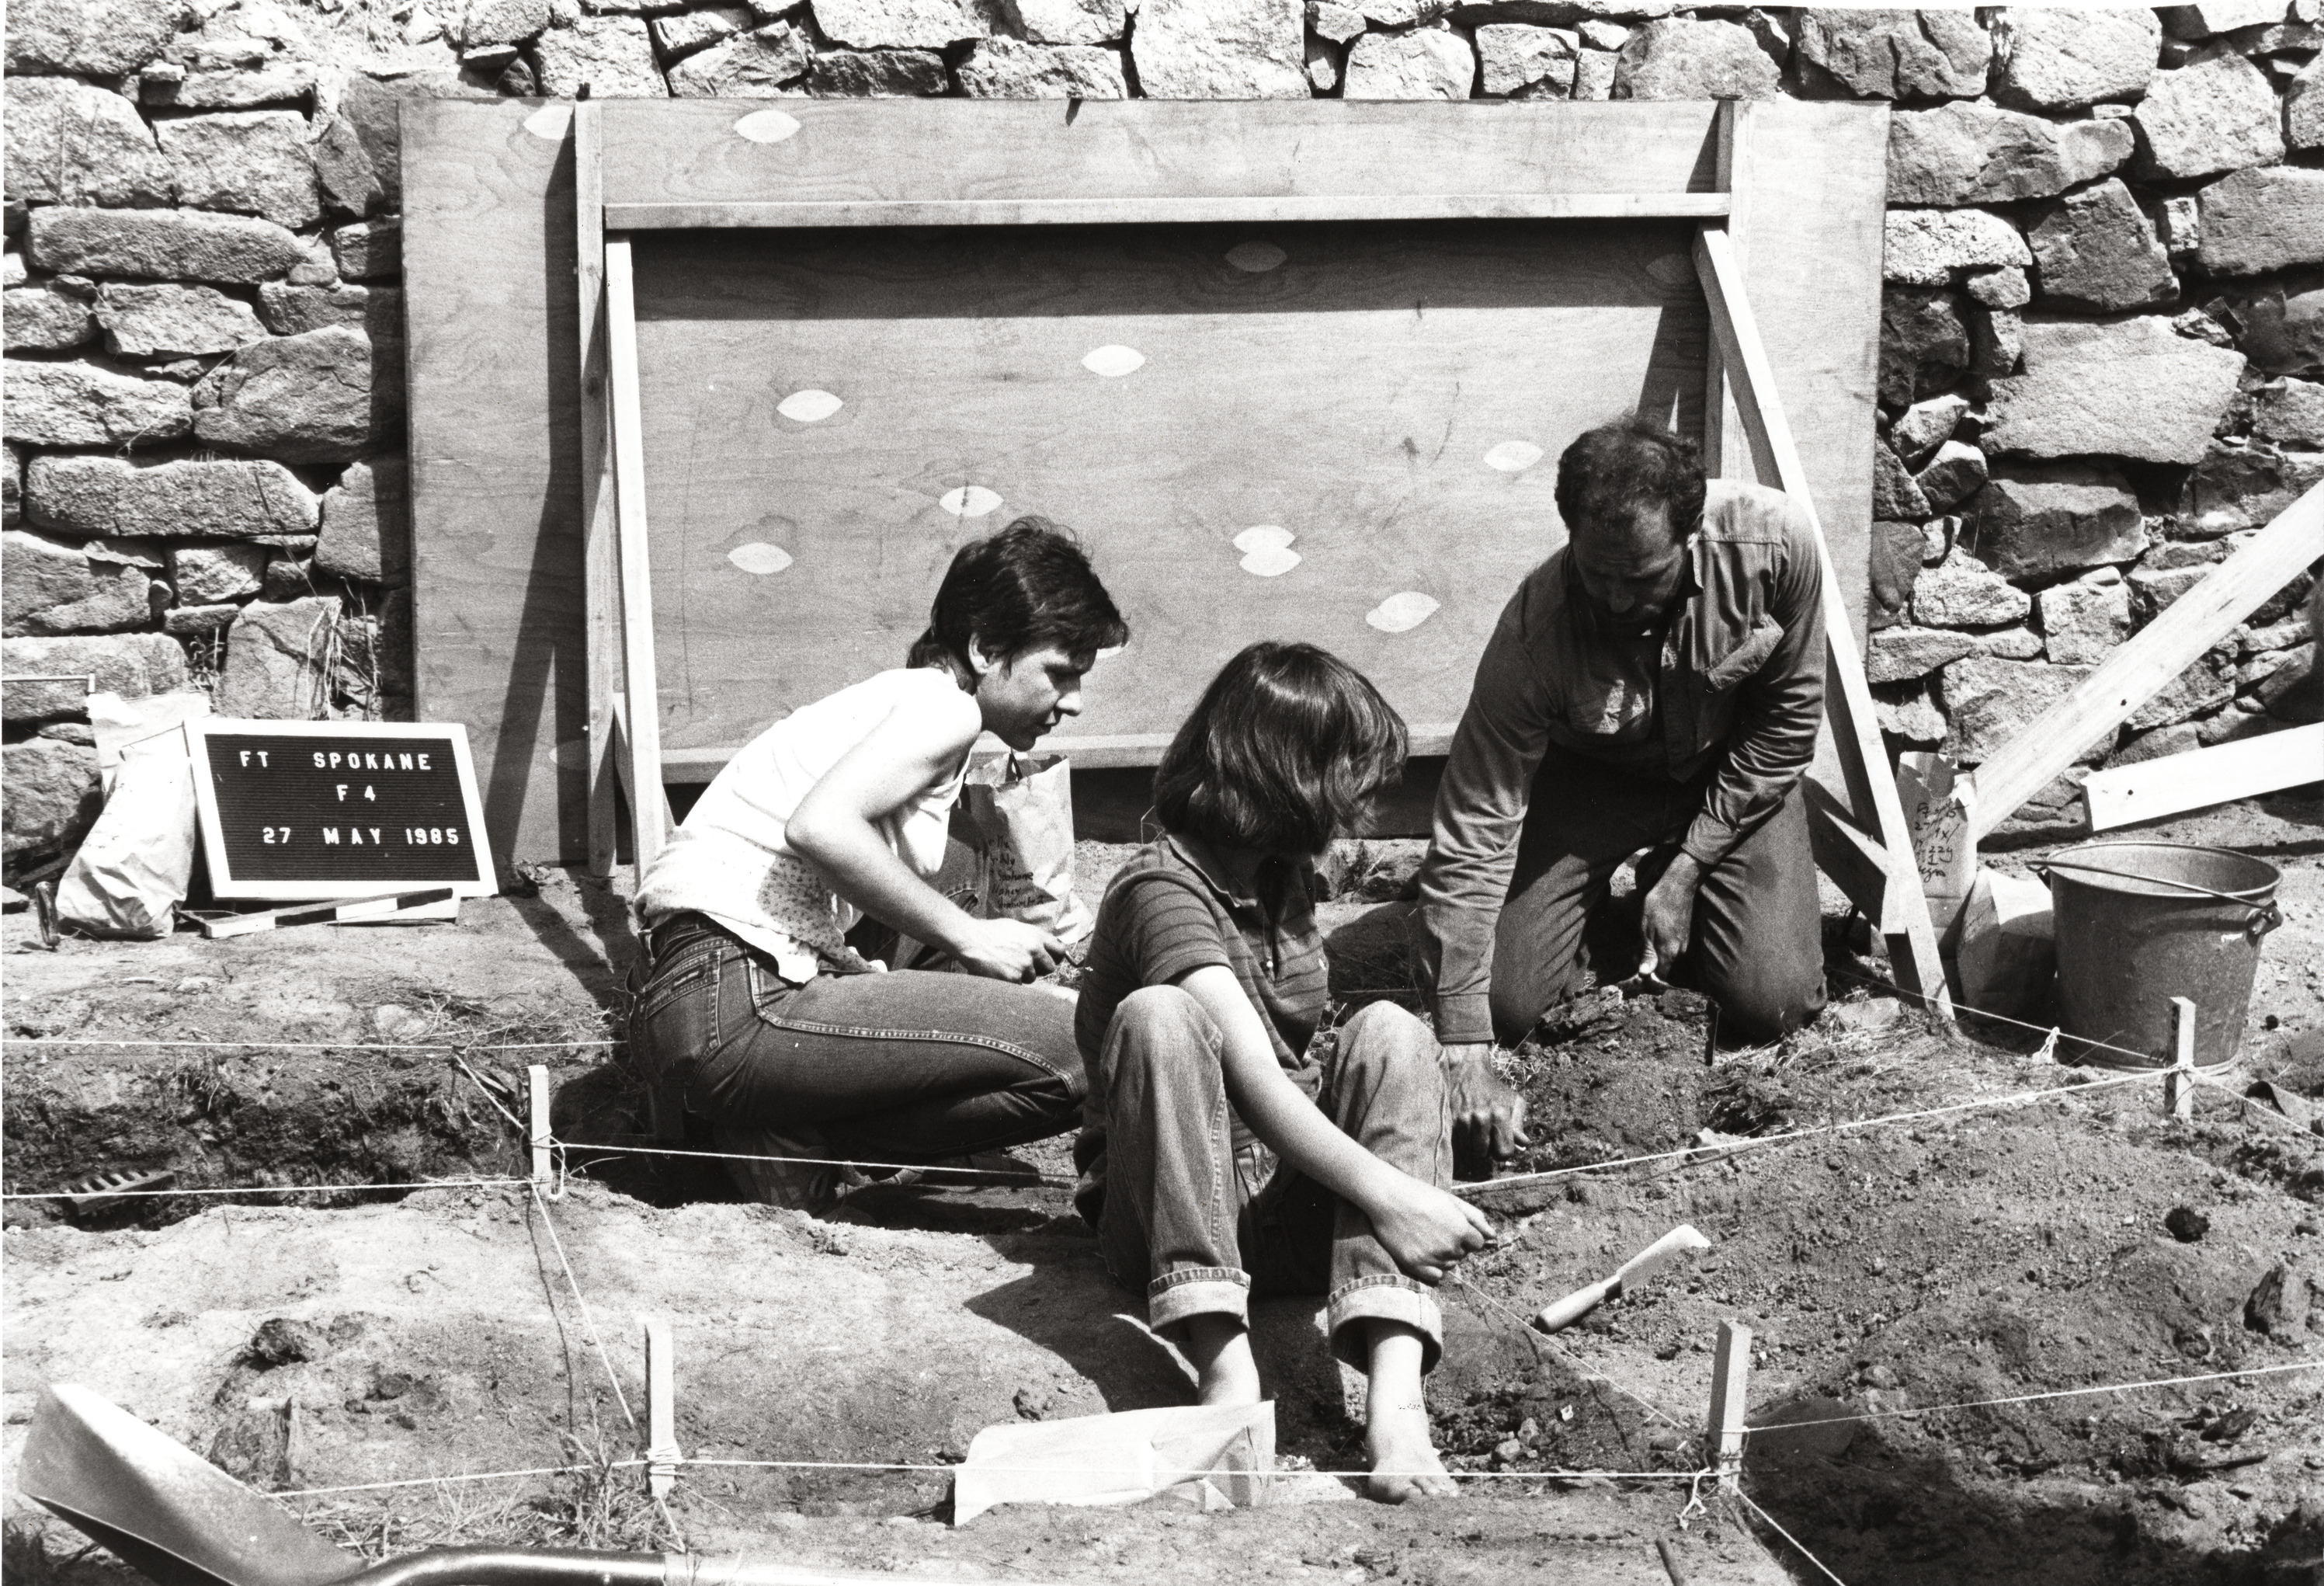 Black and white photograph of three people at archeological dig